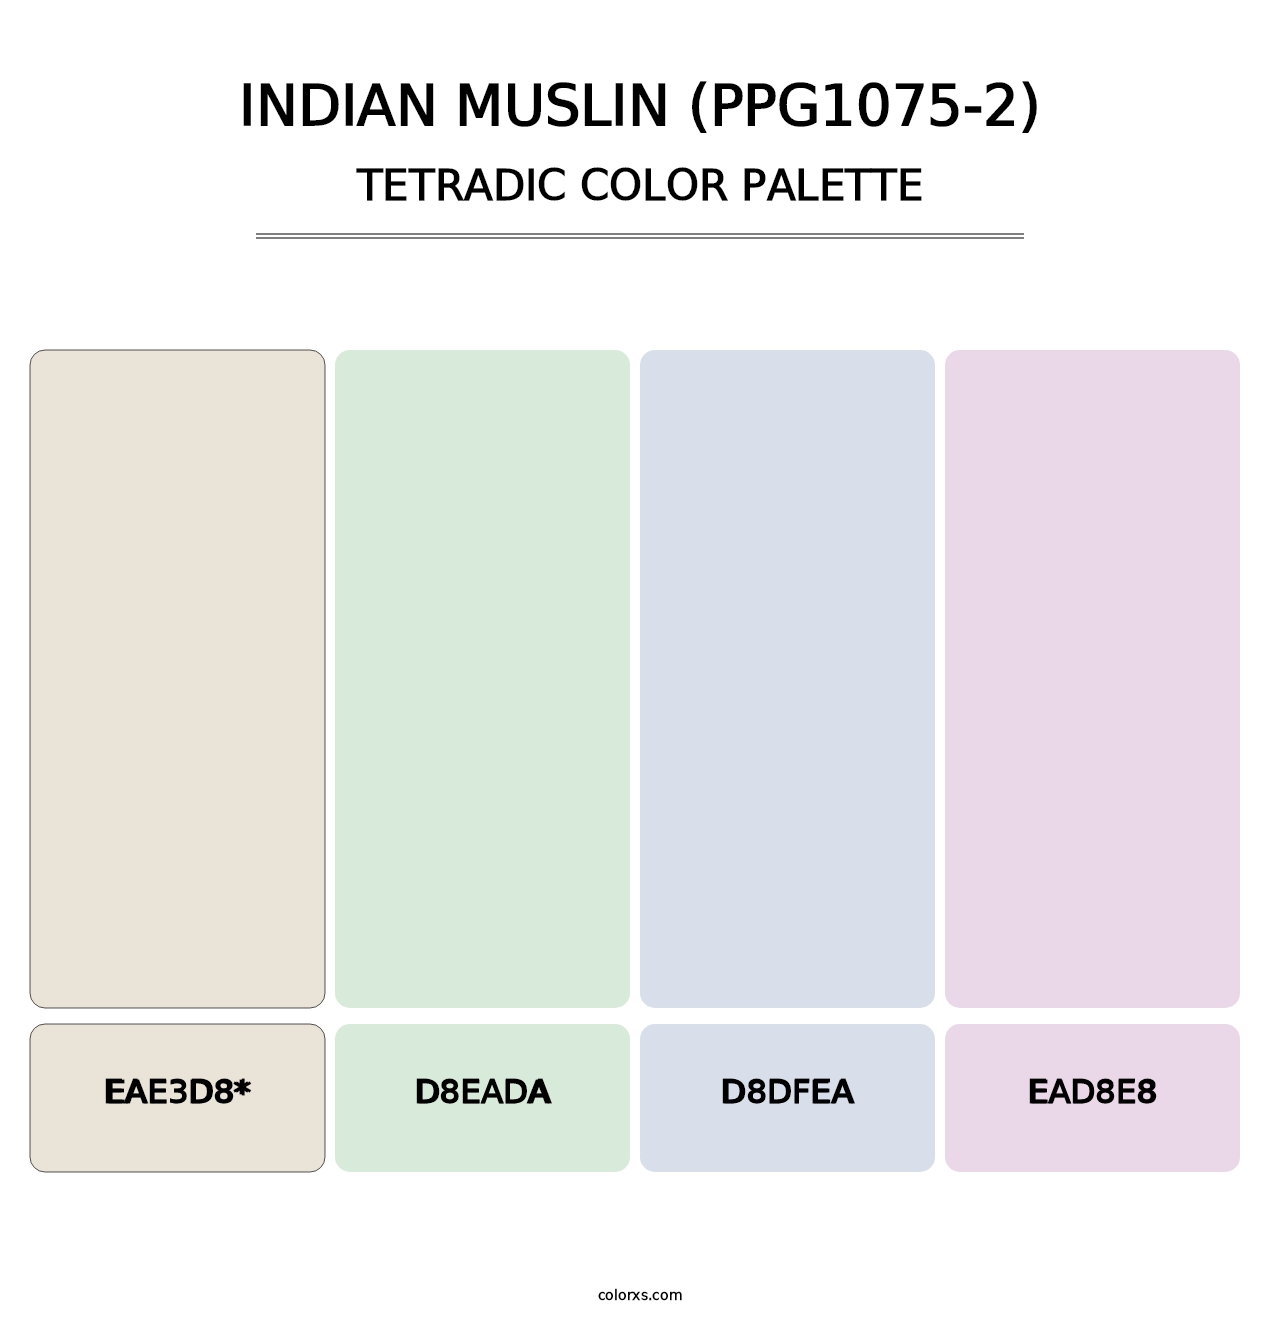 Indian Muslin (PPG1075-2) - Tetradic Color Palette